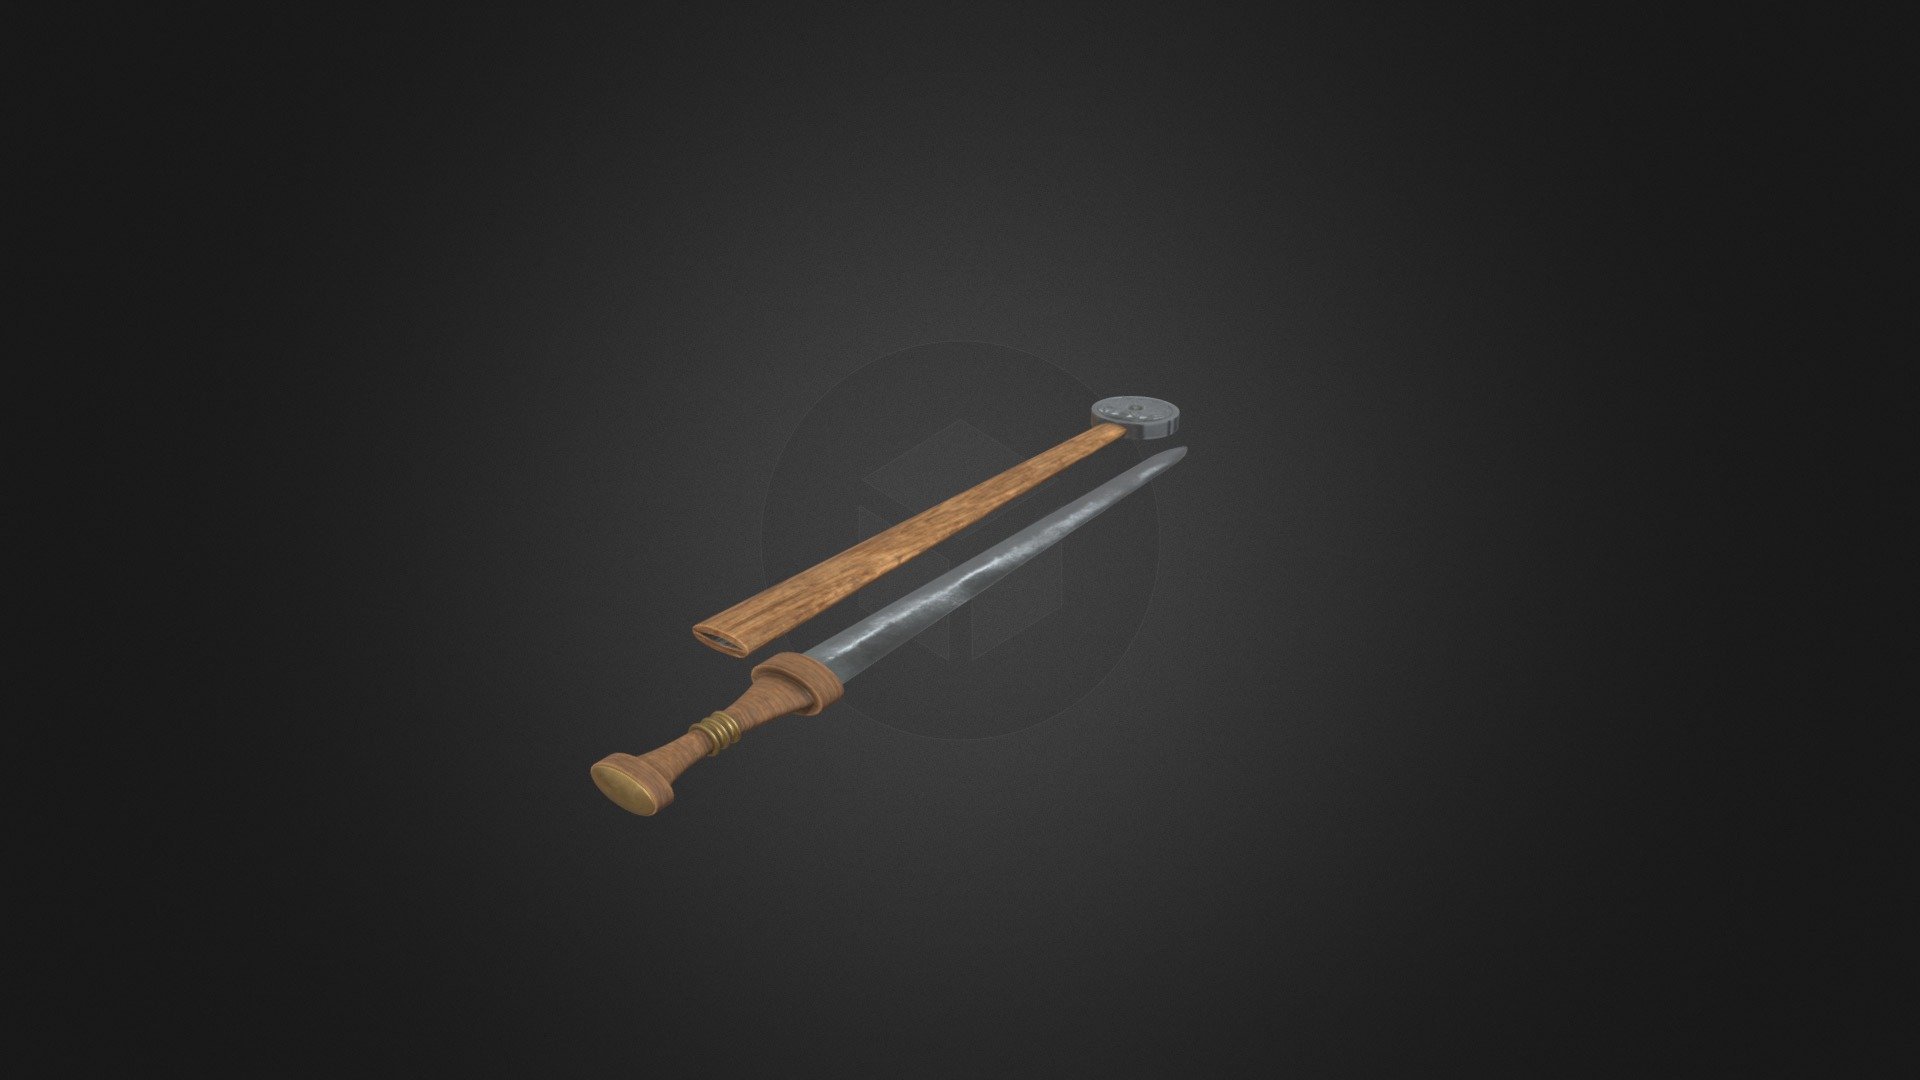 Photorealistic 3D model of a Roman Spartha Sword. The model was initially created in 3Ds Max 2012, then fully textured and rendered using V-Ray 3d model